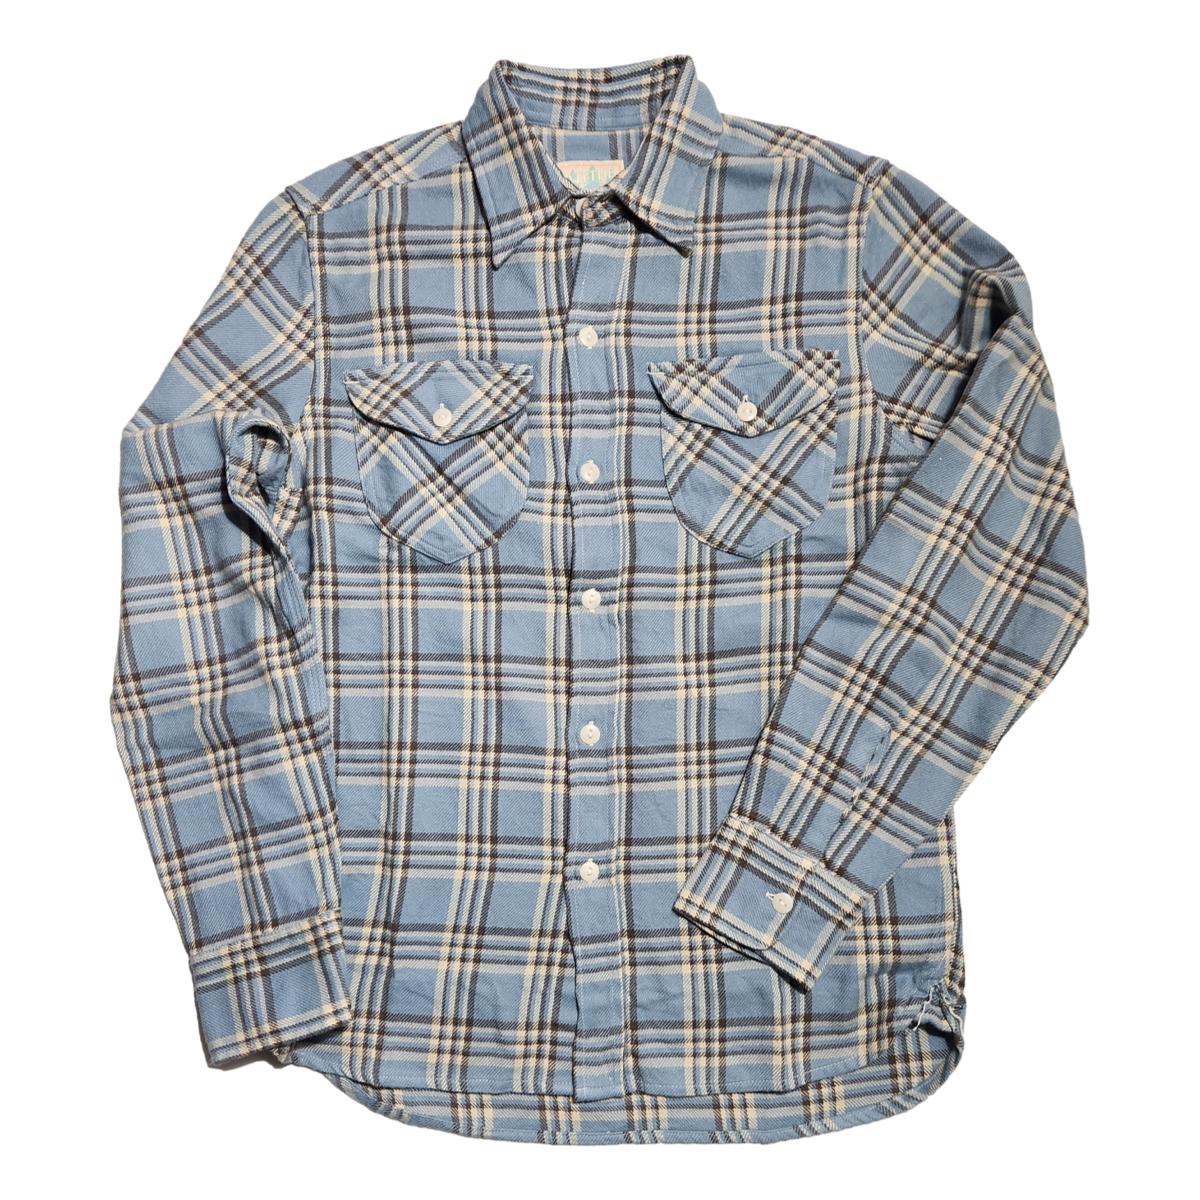 Men's Flannel Shirts for sale in Milwaukee, Wisconsin